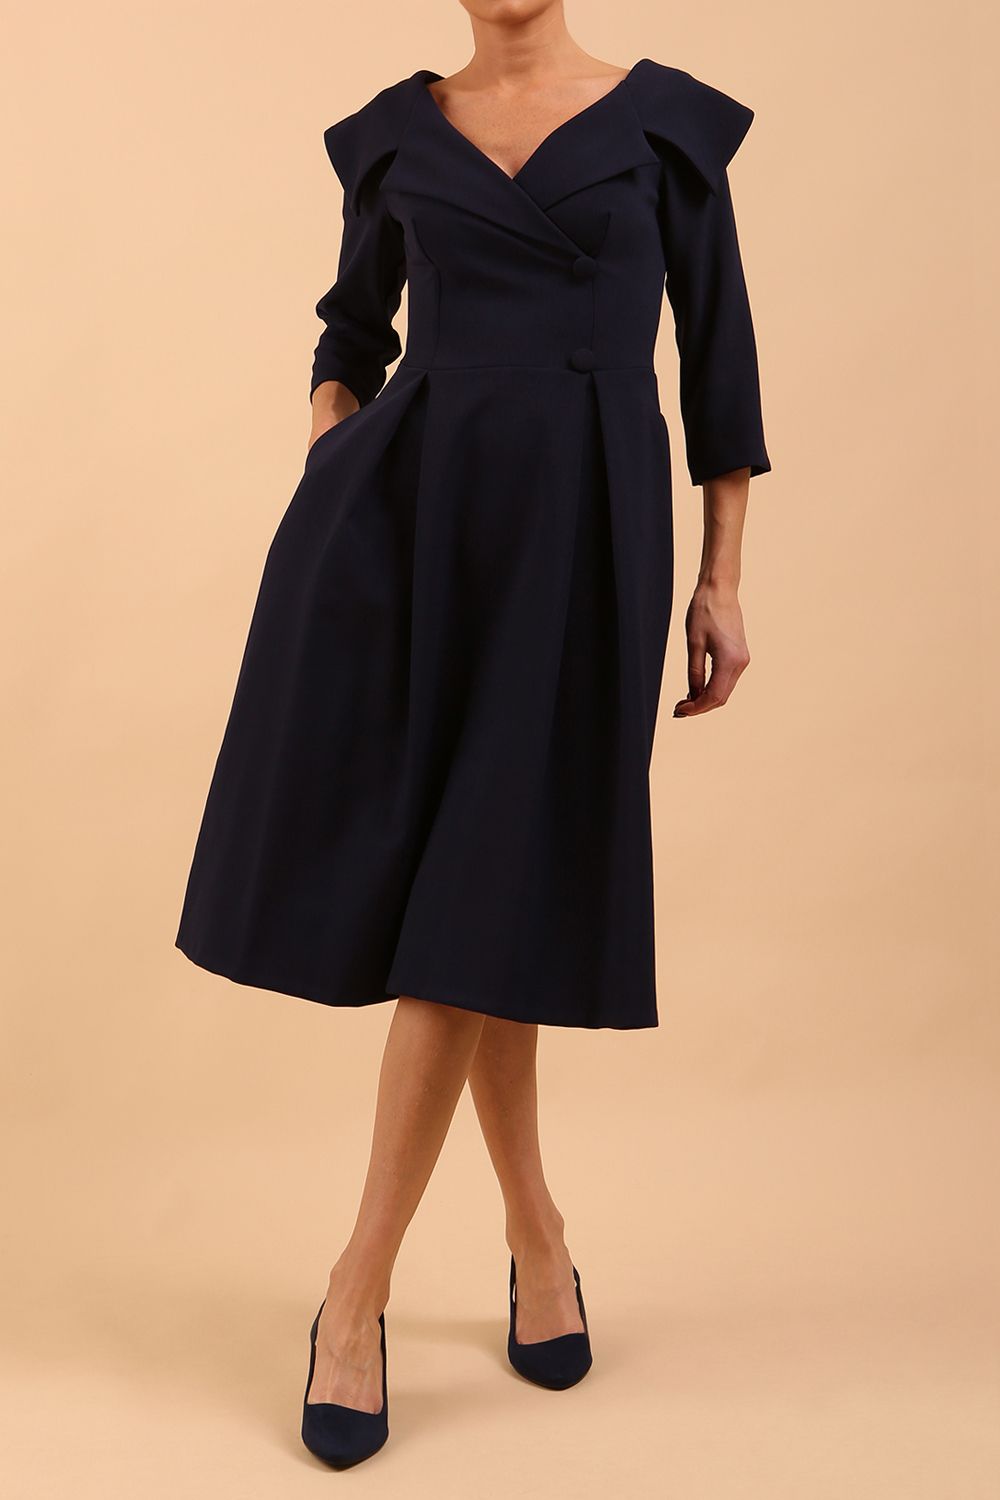 model is wearing a sleeved oversized collar swing dress with button detail at the front and pockets in the skirtmodel is wearing diva catwalk gatsby swing dress with pocket detail and wide v-neck collar and buttons down the front panel in navy blue front